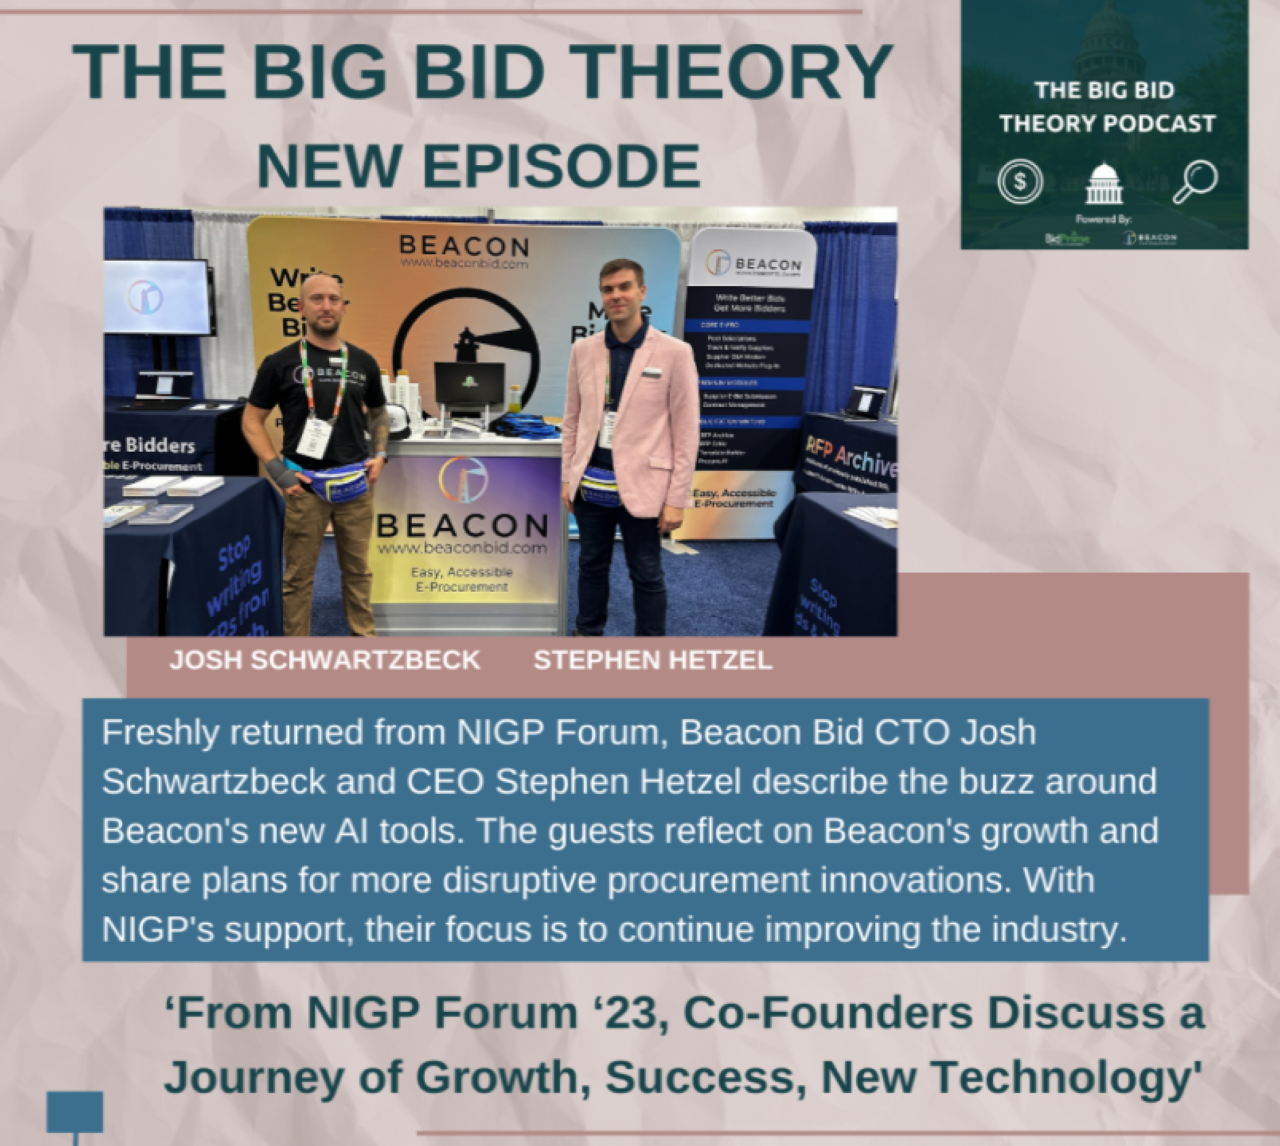 From NIGP Forum ‘23, Co-Founders Discuss a Journey of Growth, Success, New Technology